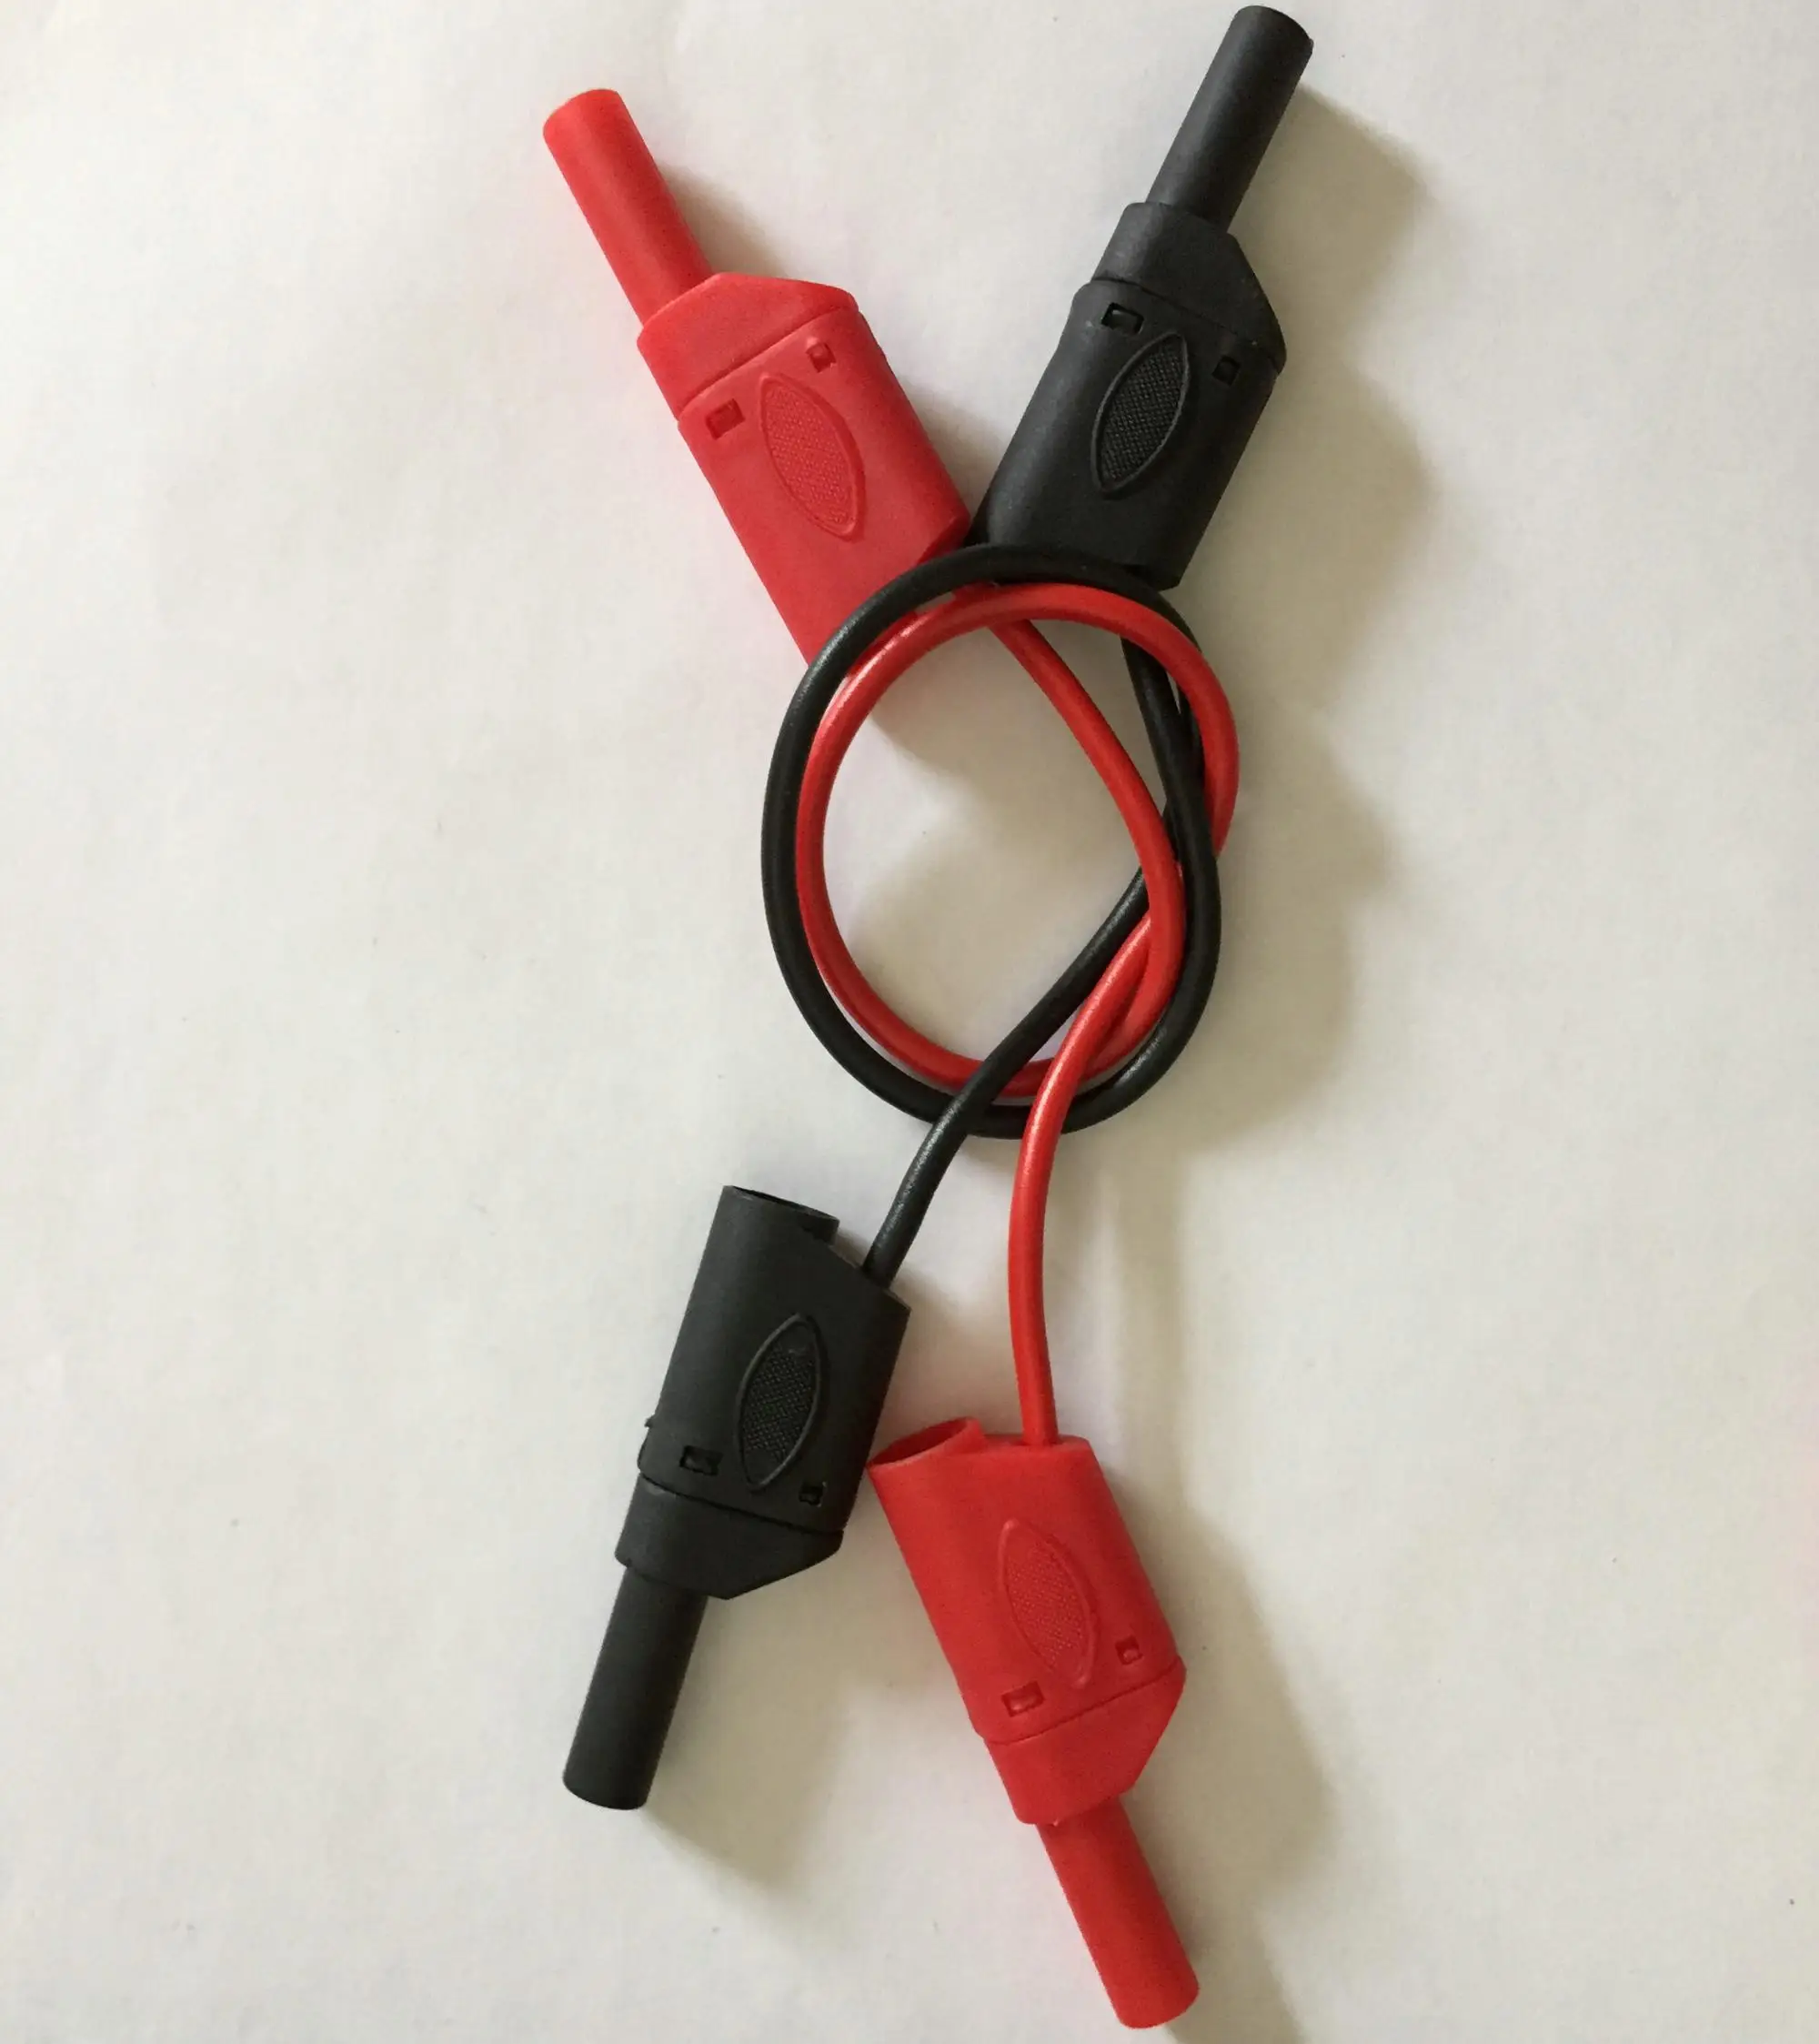 Details about   4mm Banana Shrouded Socket plug Binding Post Connector Insulated Safety Lead End 